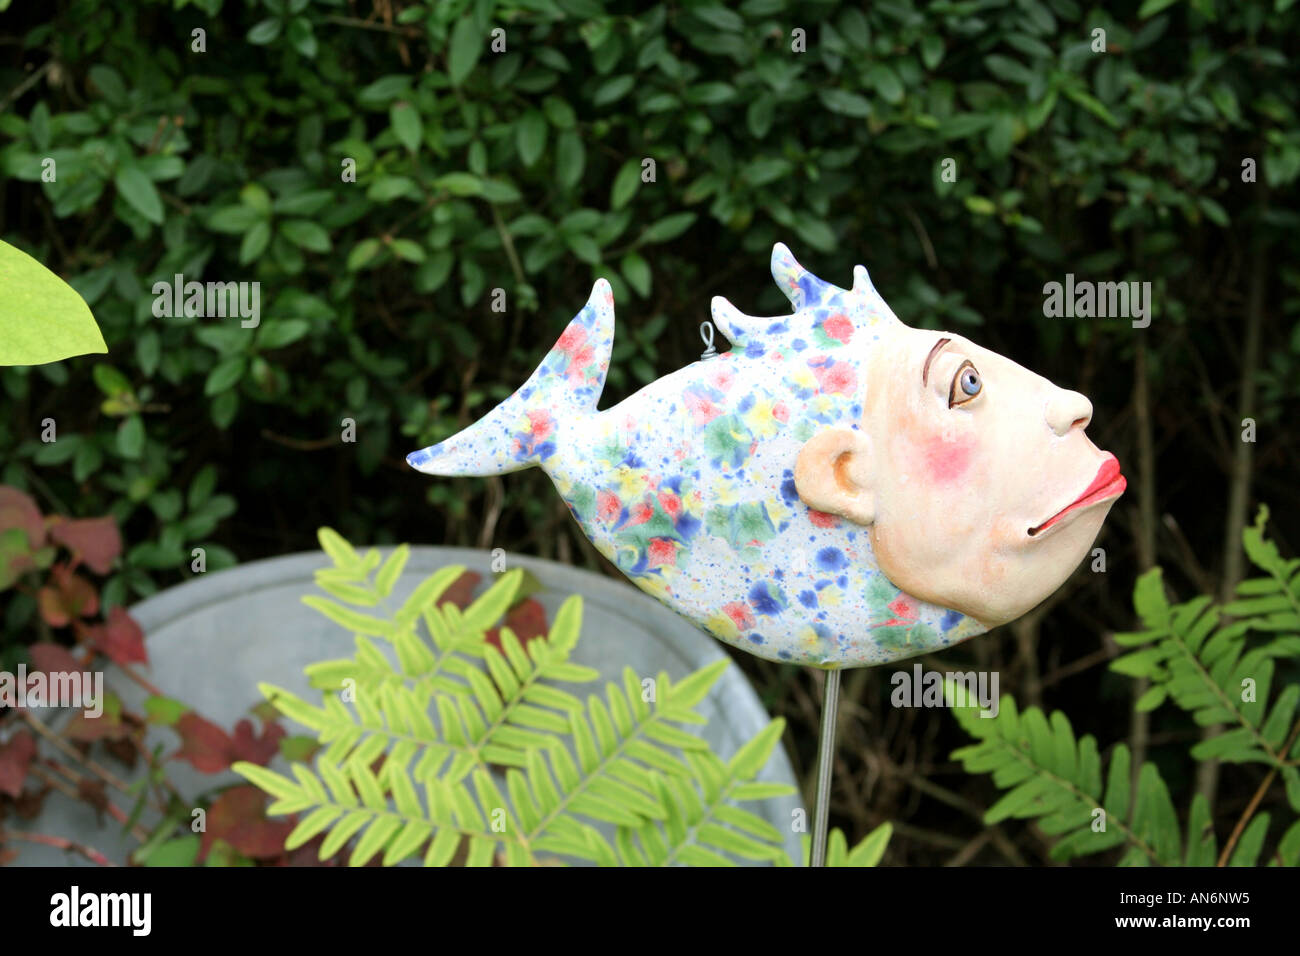 artistic painted ceramic fish humorous ornament  in a private garden Stock Photo